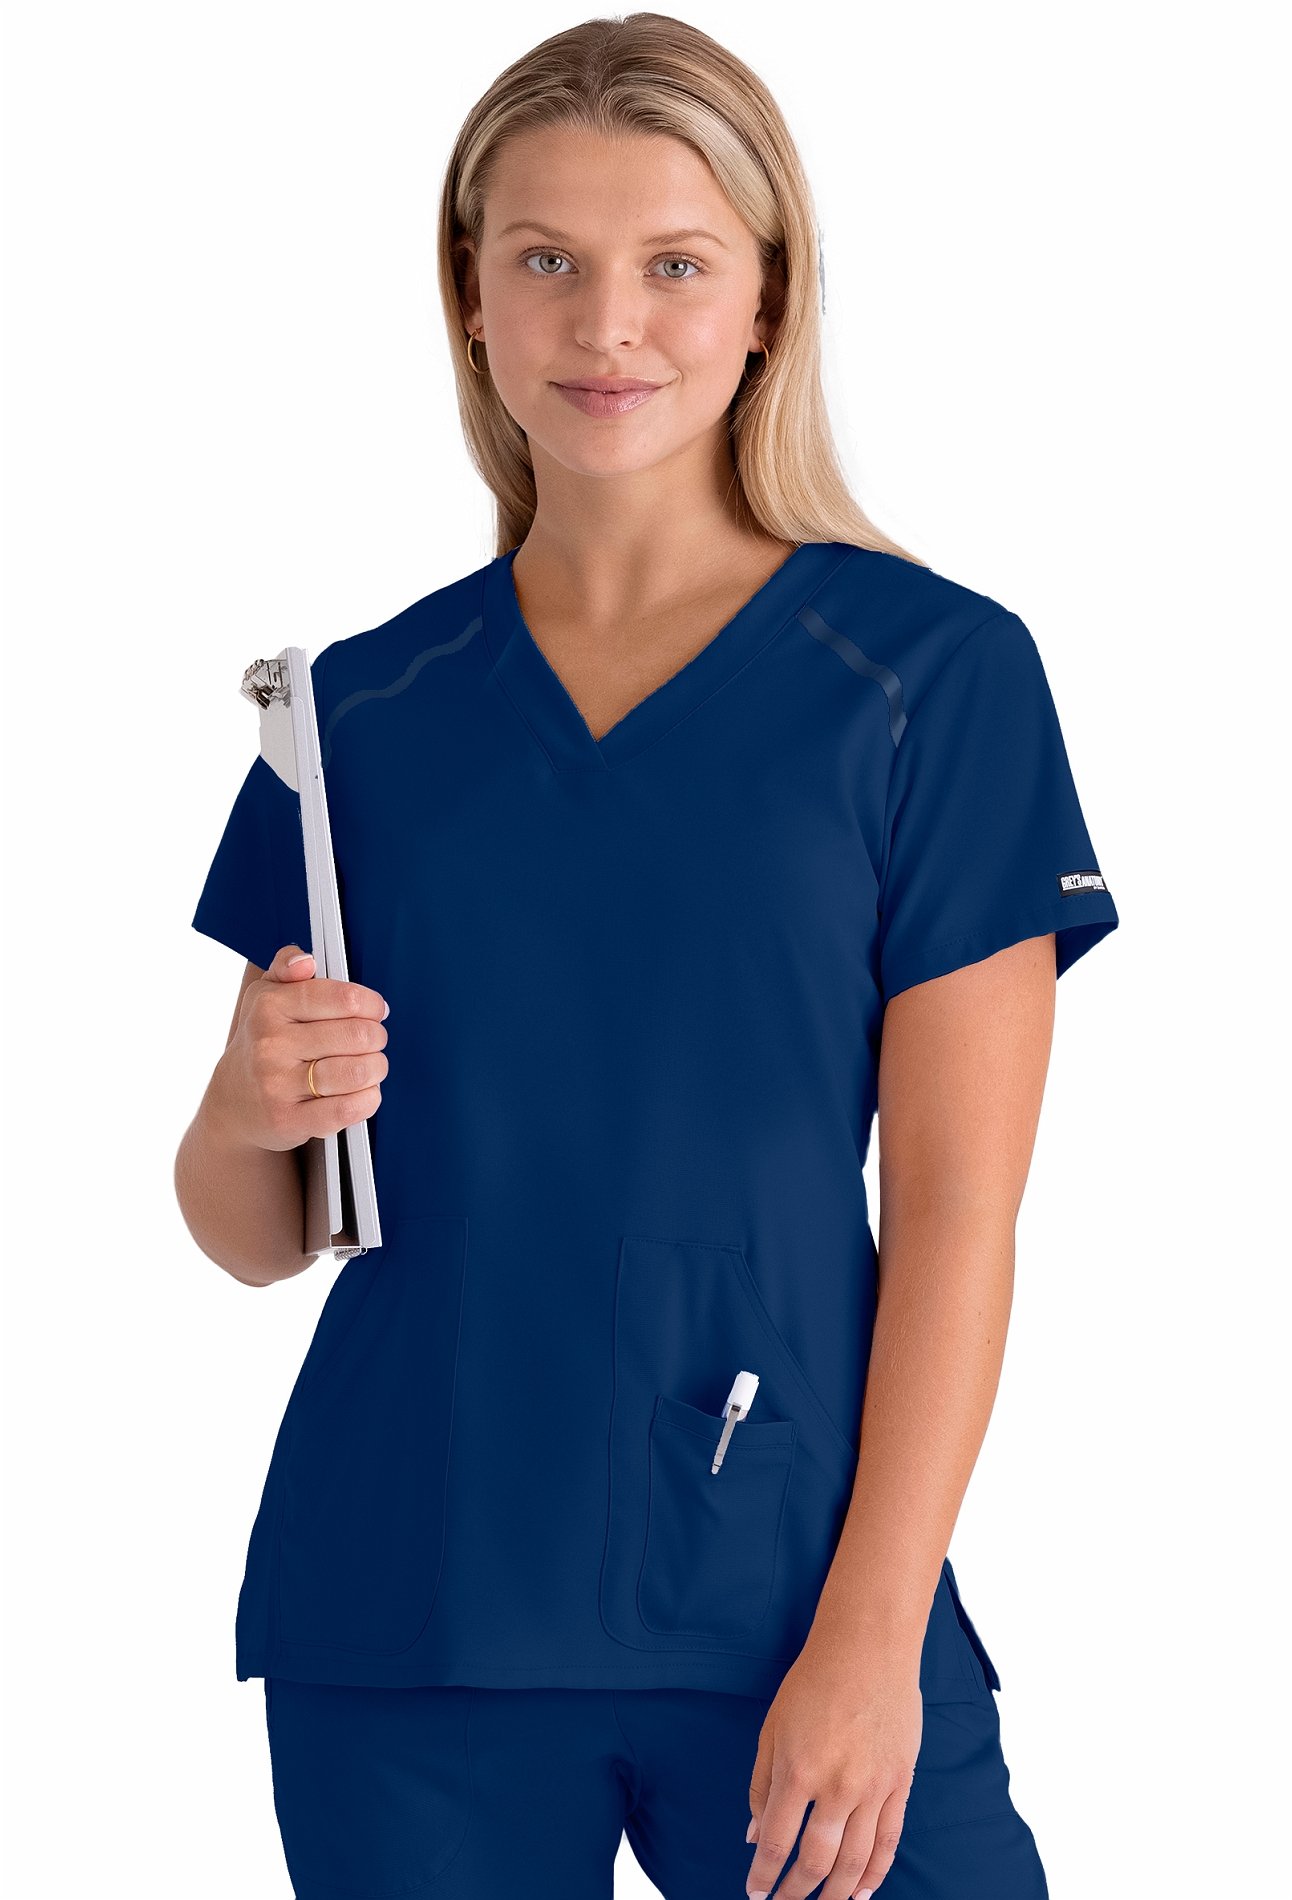 https://medicalscrubscollection.com/content/images/thumbs/0755717_greys-anatomy-impact-womens-elevate-v-neck-scrub-top-7188.jpeg